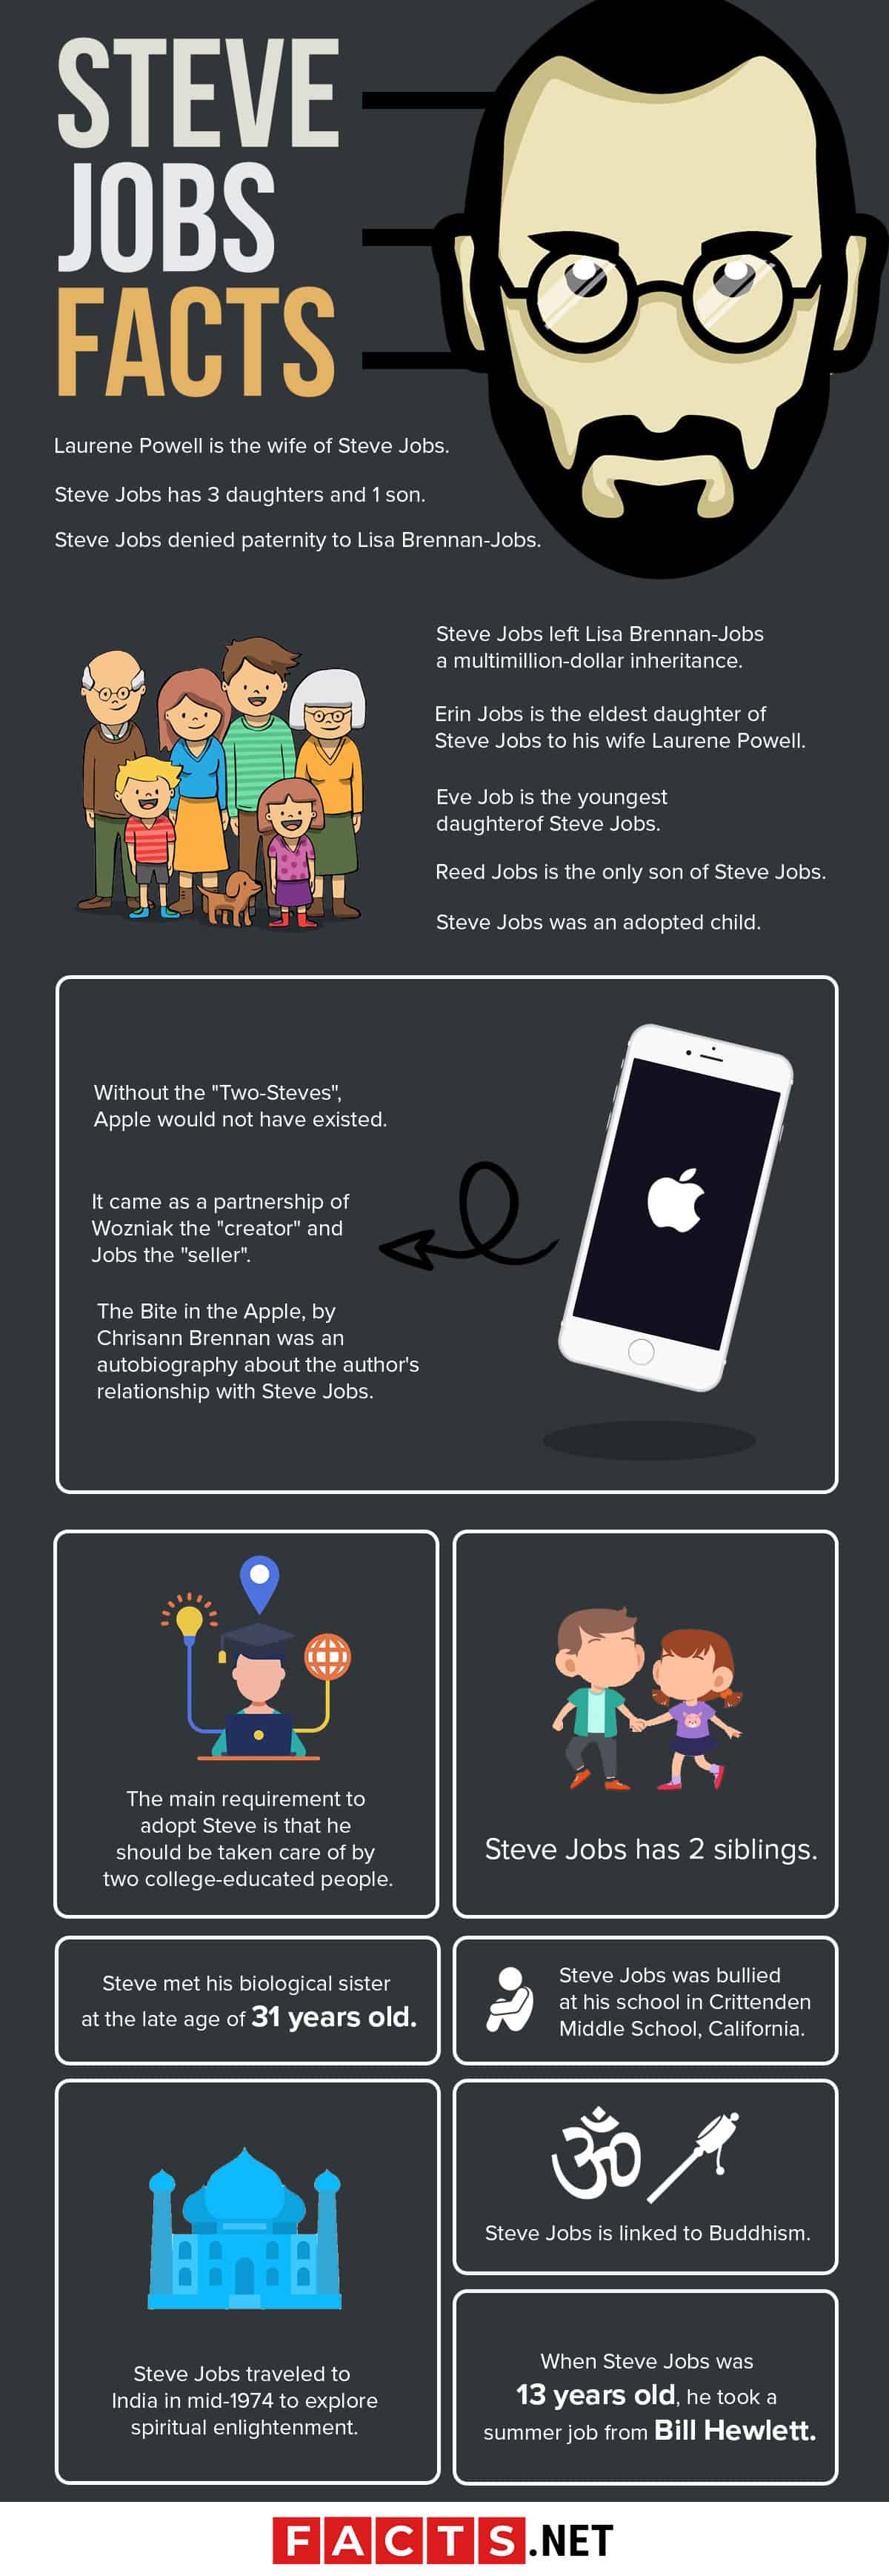 60 Interesting Steve Jobs Facts You Have To Know Facts Net